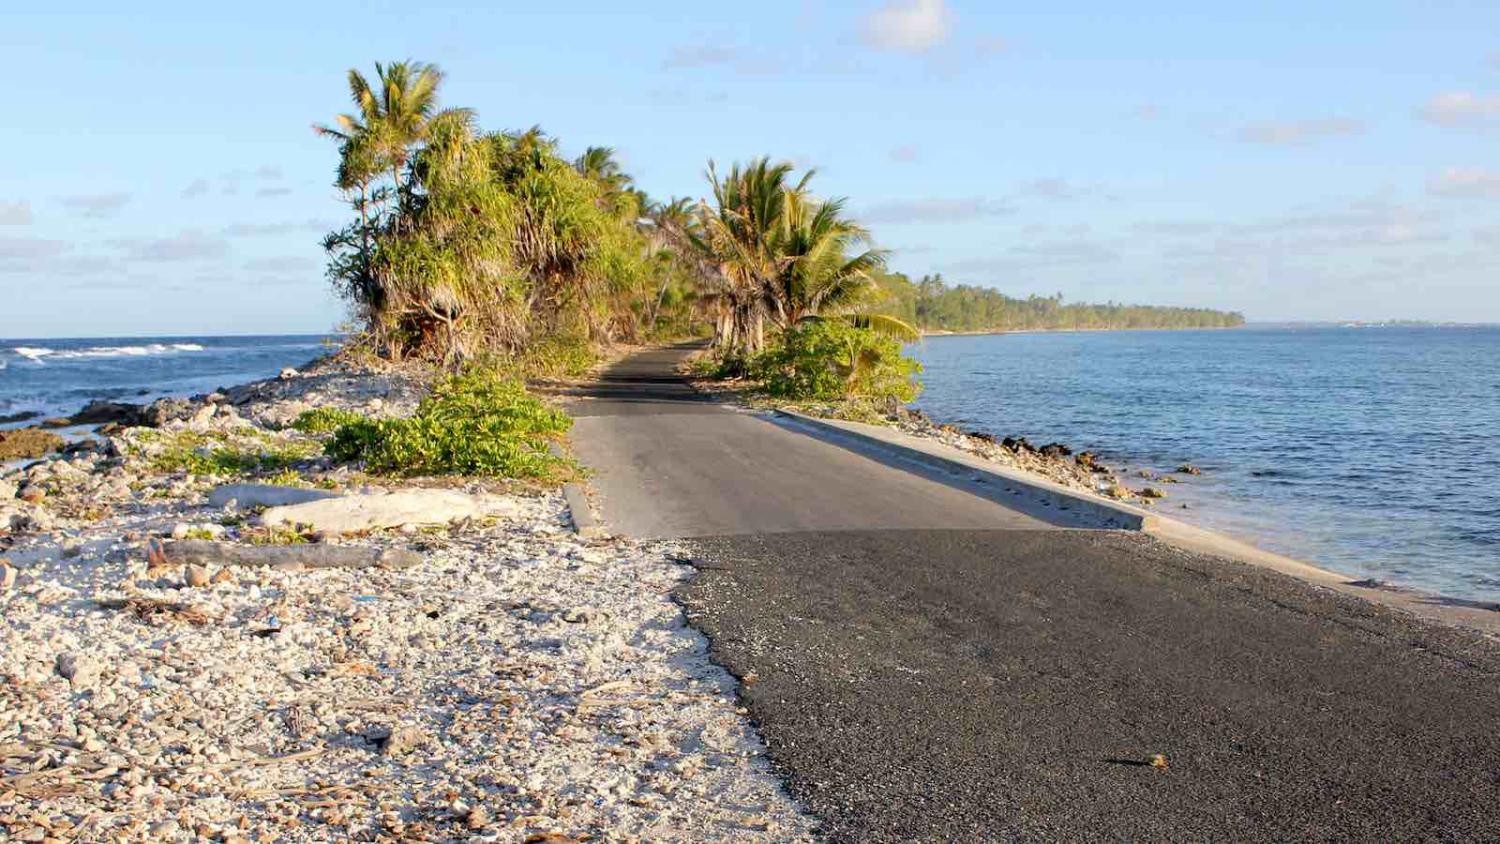 On the road in Tuvalu (Photo: DFAT/Flickr)